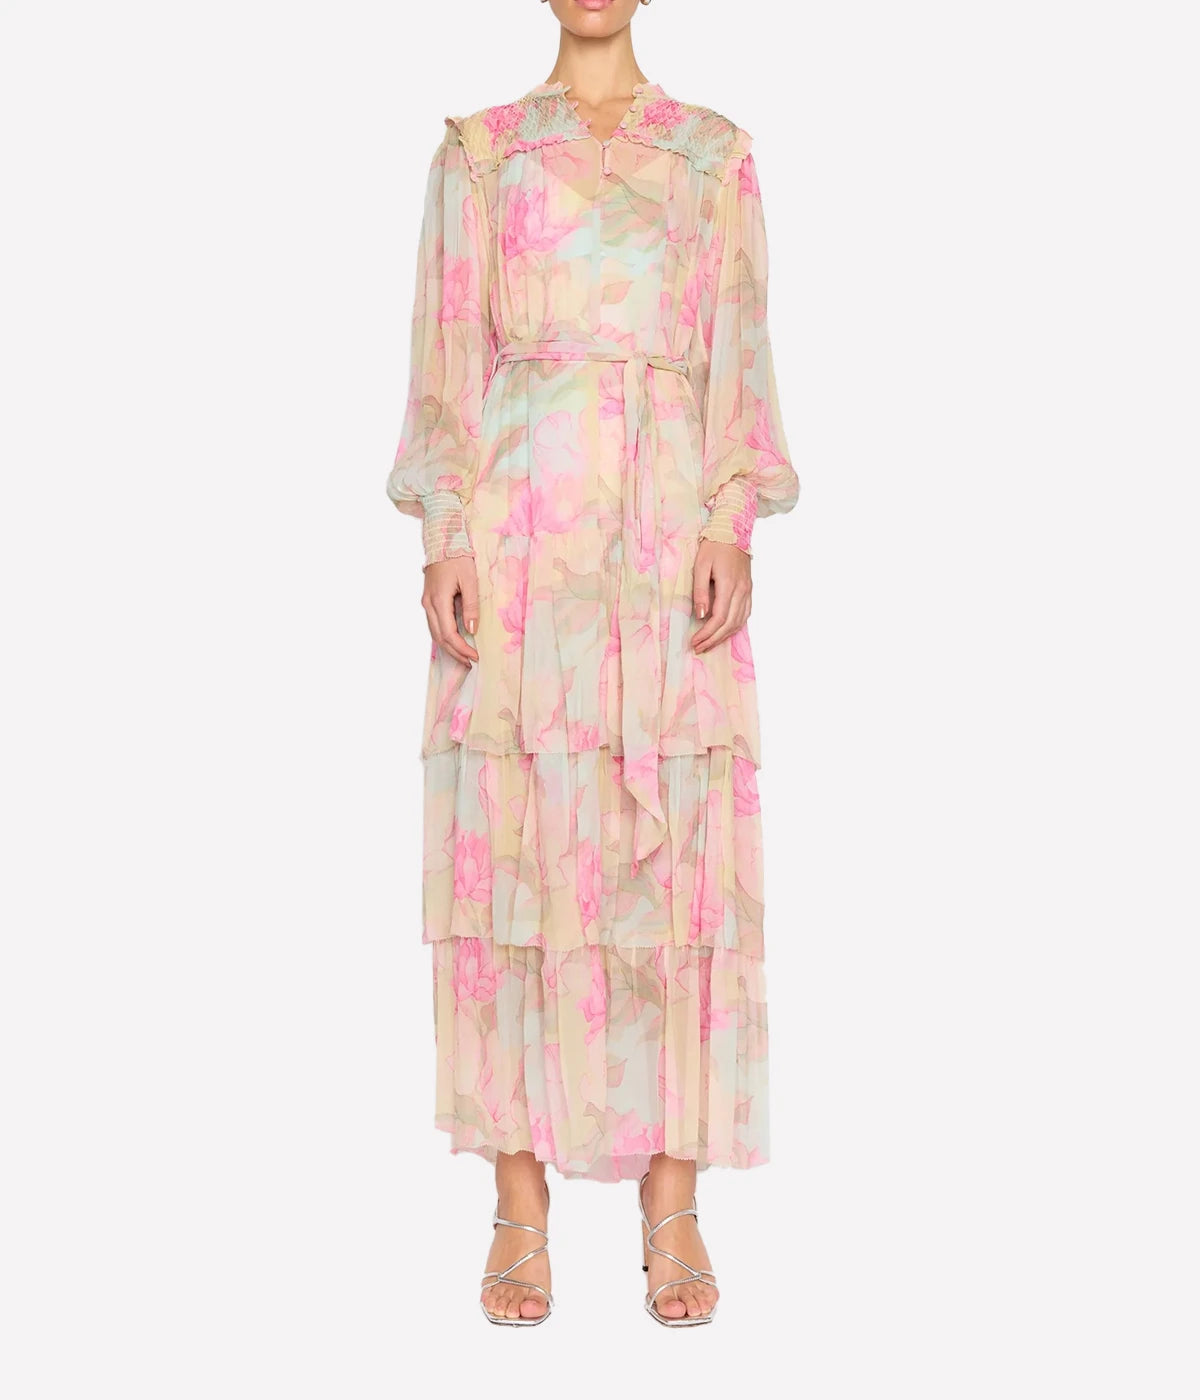 Ana Dress in Waterlily Pink